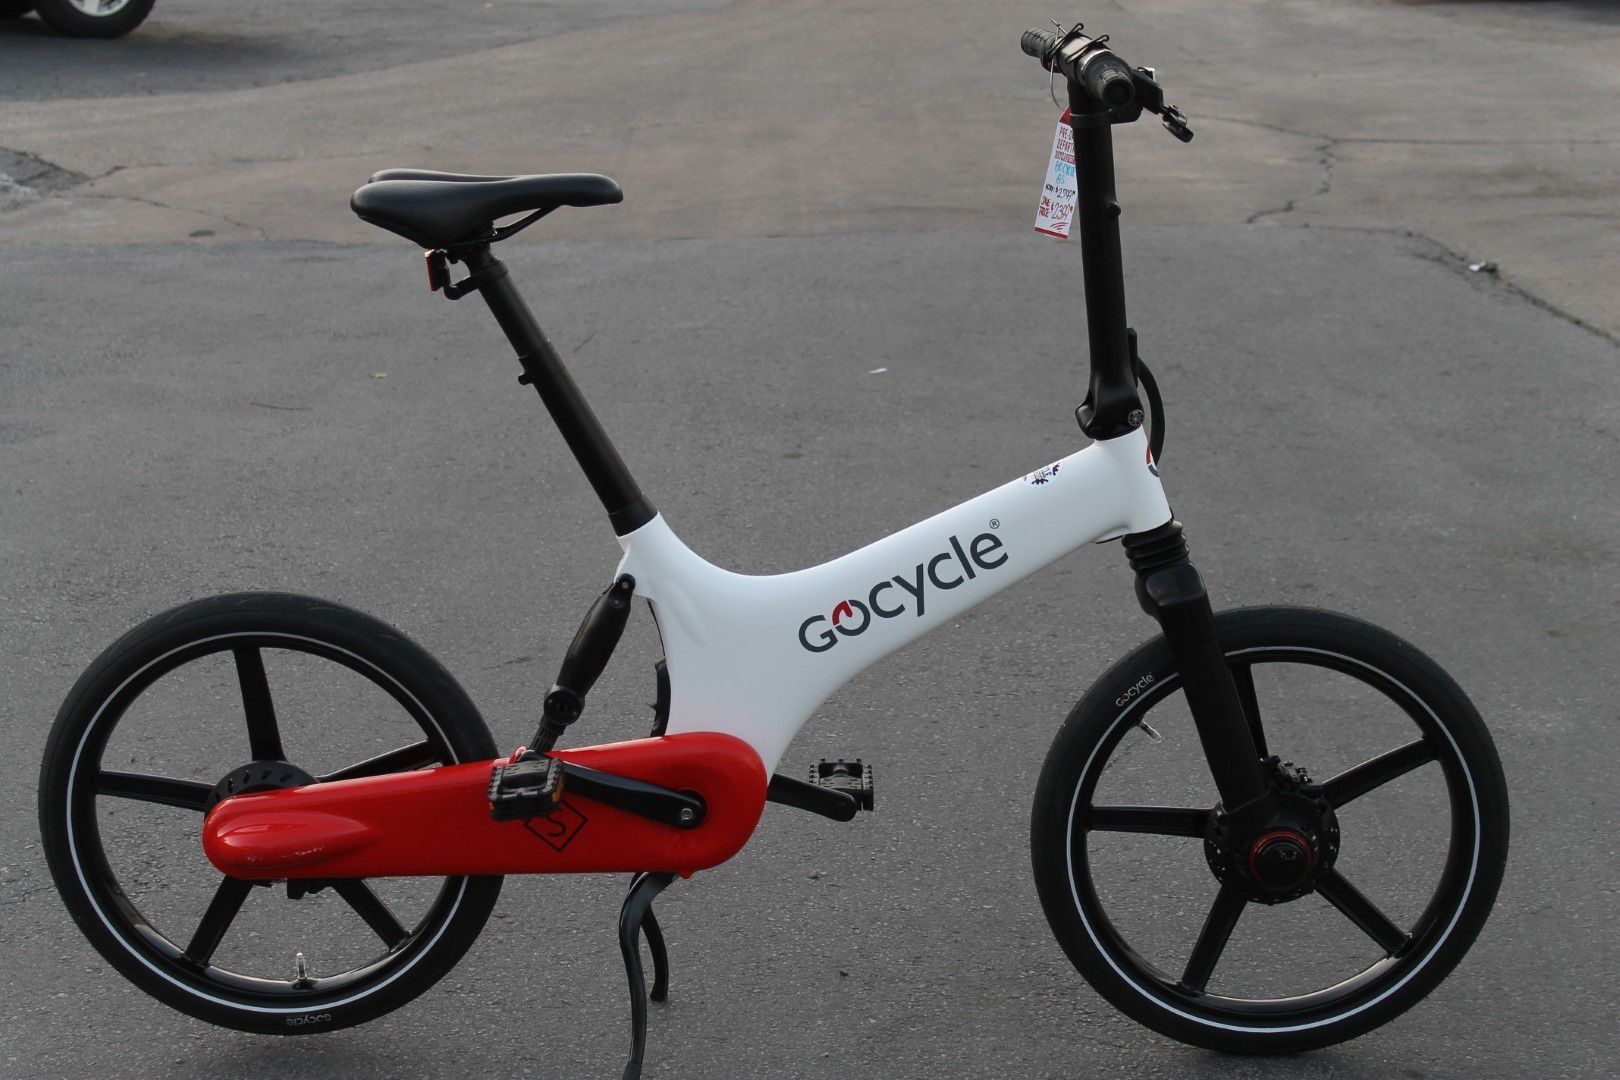 Sale Today! BRAND NEW Electric GOCYCLE GS folding bicycle Best Looking and highest graded ebike! Has less than 1 mile on ODOMETER, 20MPH